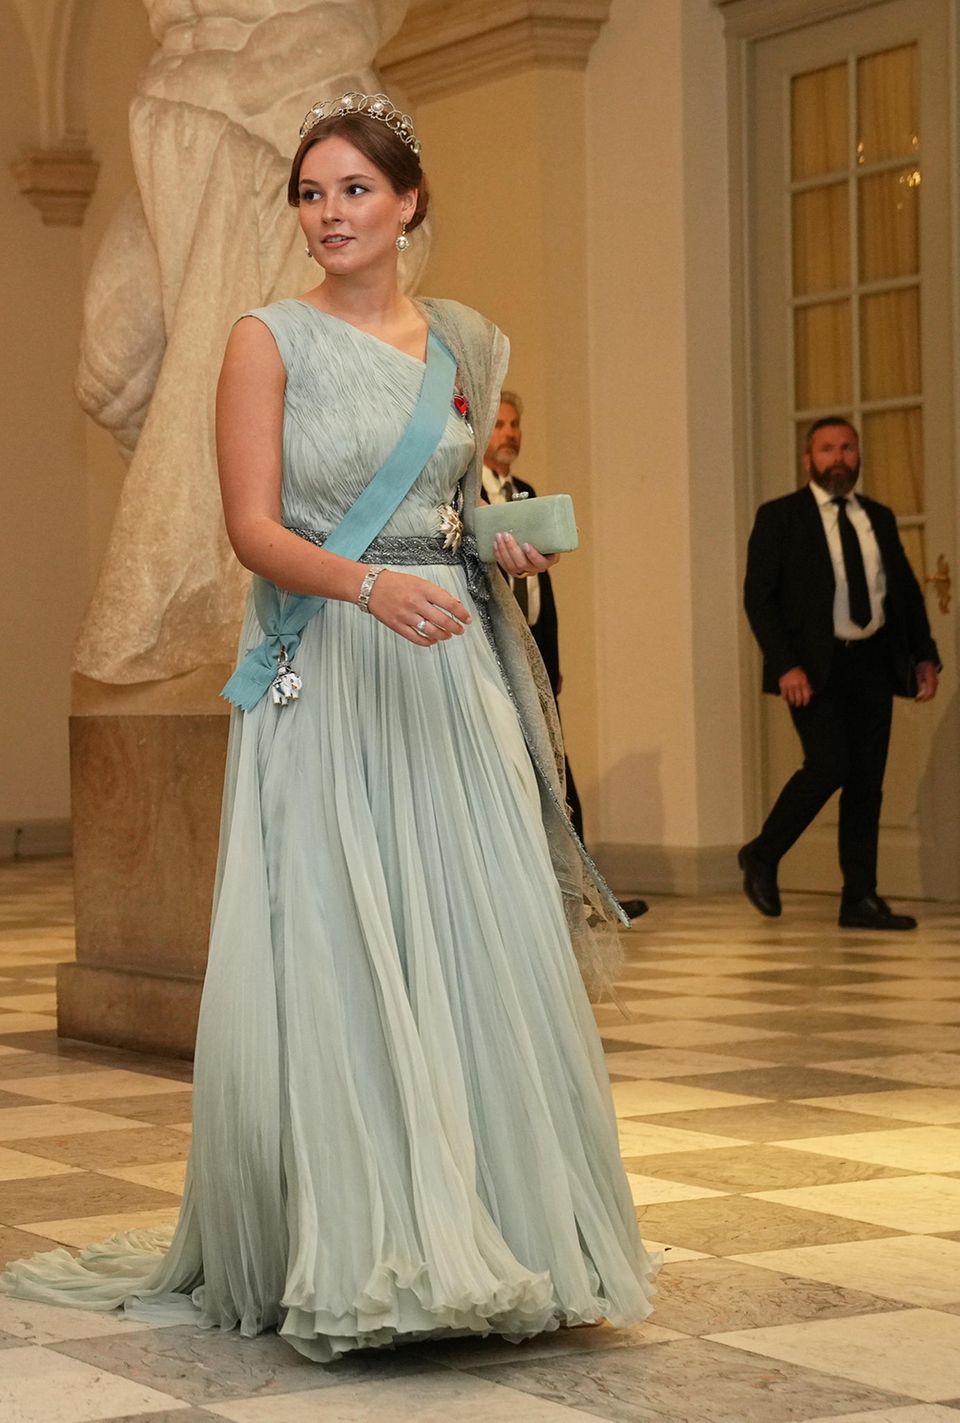 That's not possible in the royal rule book: Princess Ingrid Alexandra wears her sash on bare skin. 